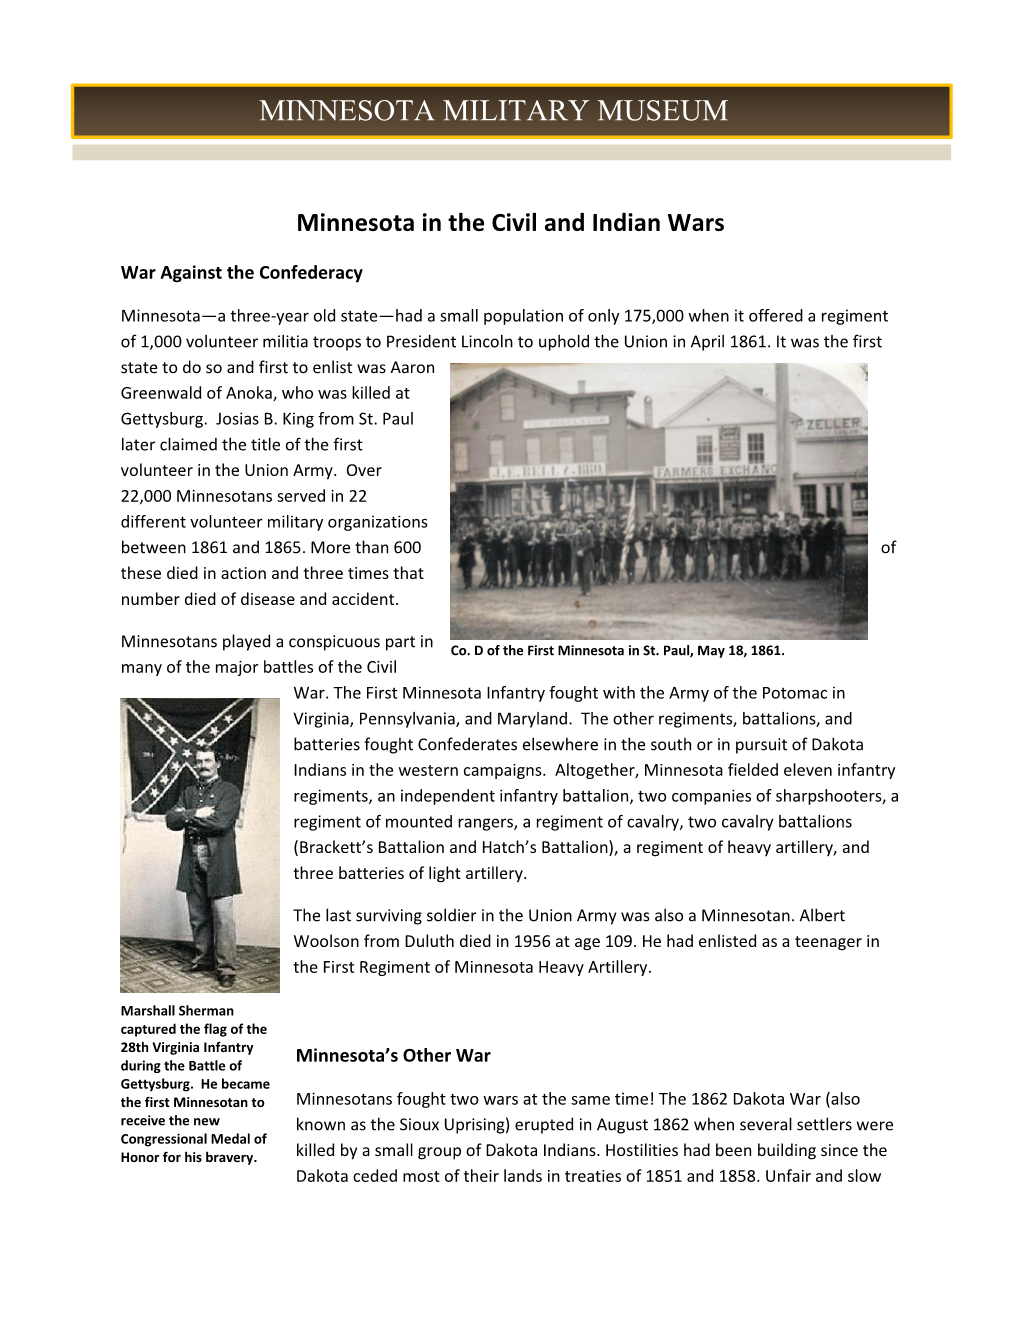 Minnesota and the Civil and Indian Wars